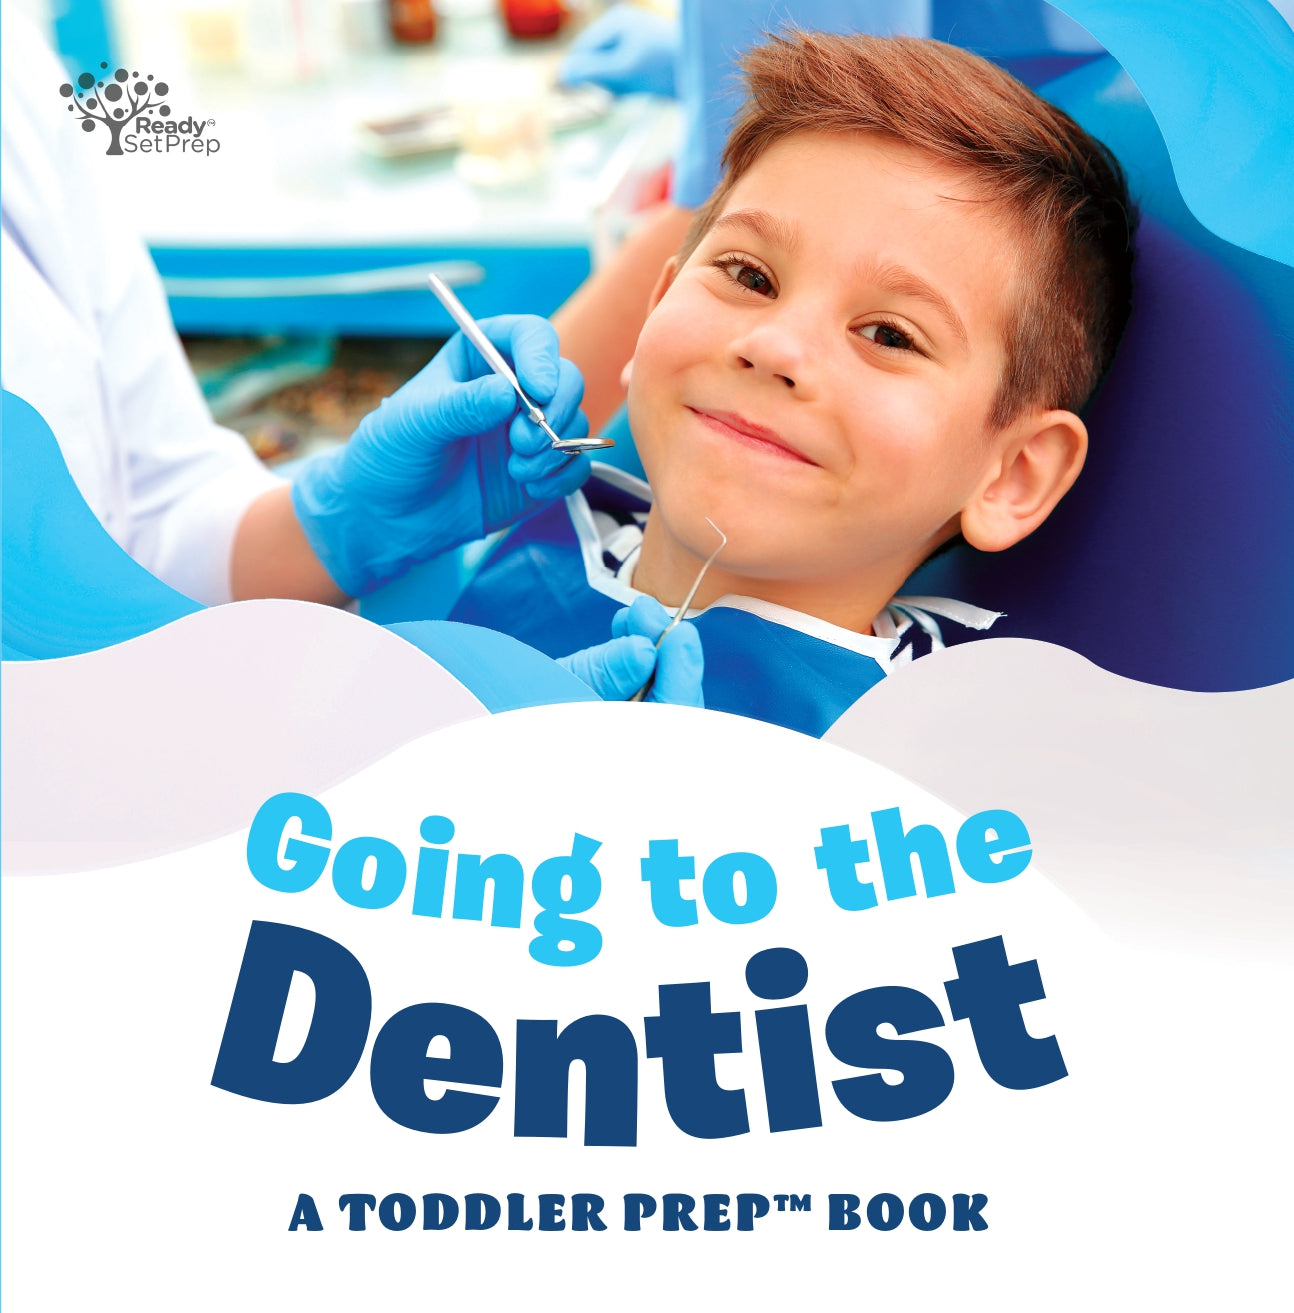 Going to the Dentist: A Toddler Prep Book